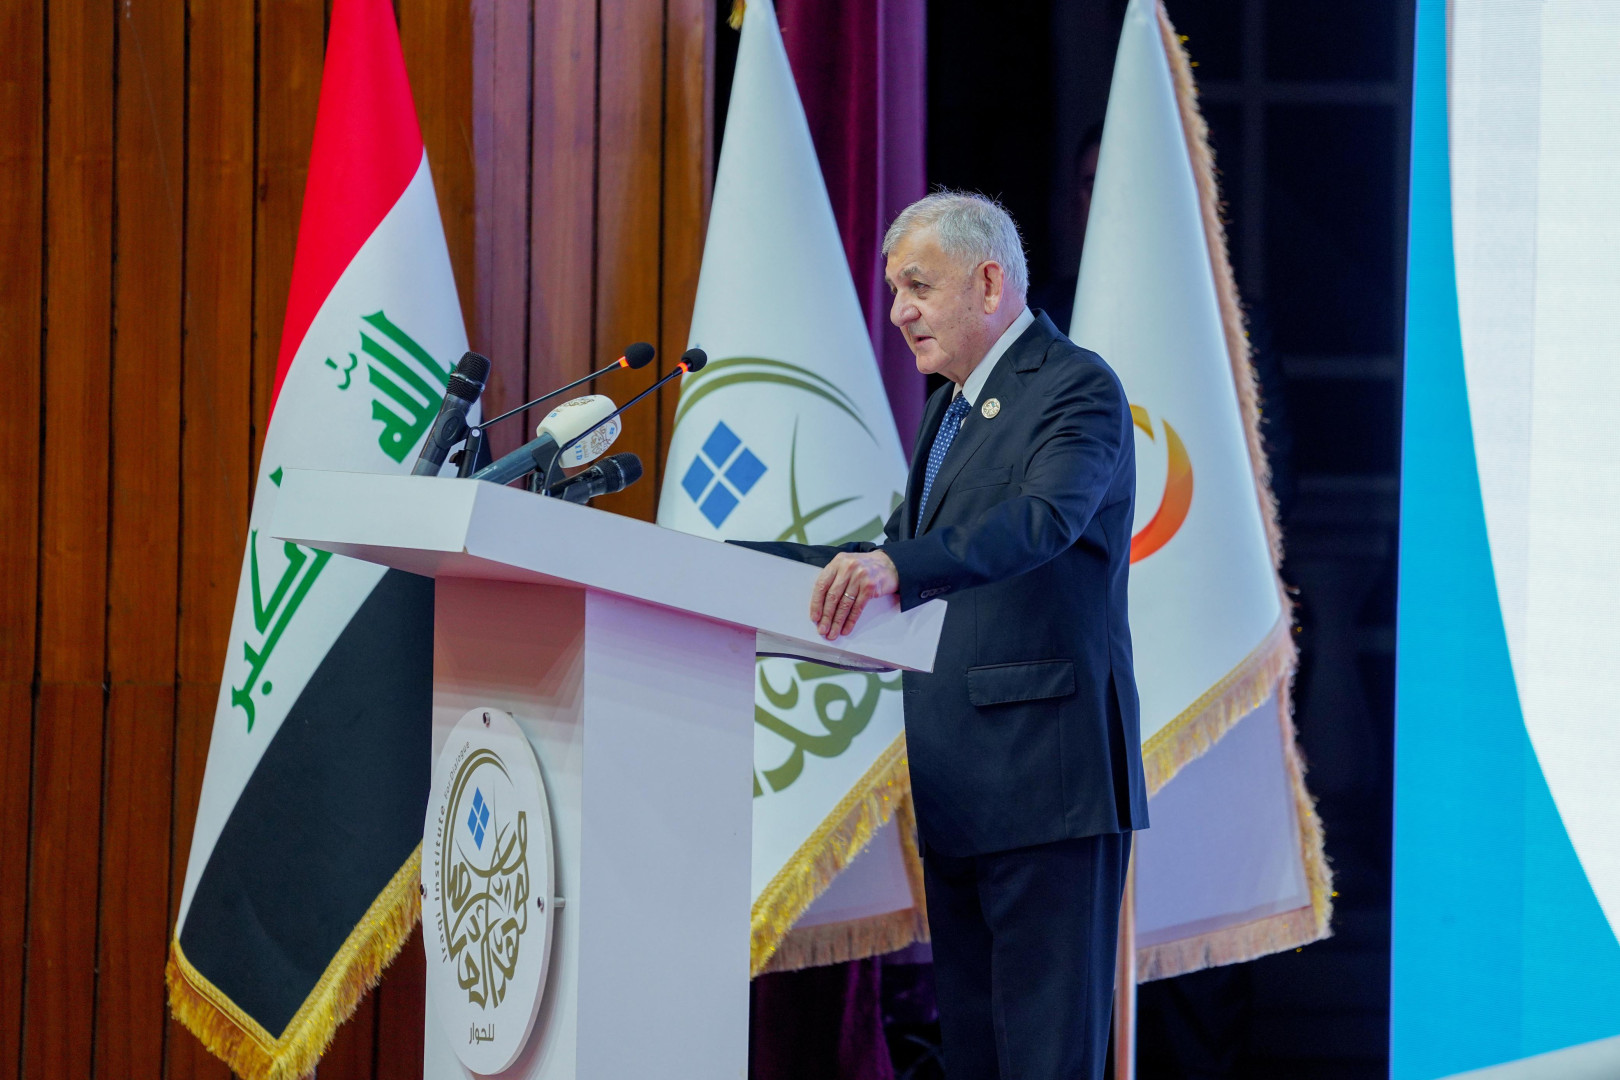 Iraqi President emphasizes regional stability through dialogue and Palestinian rights